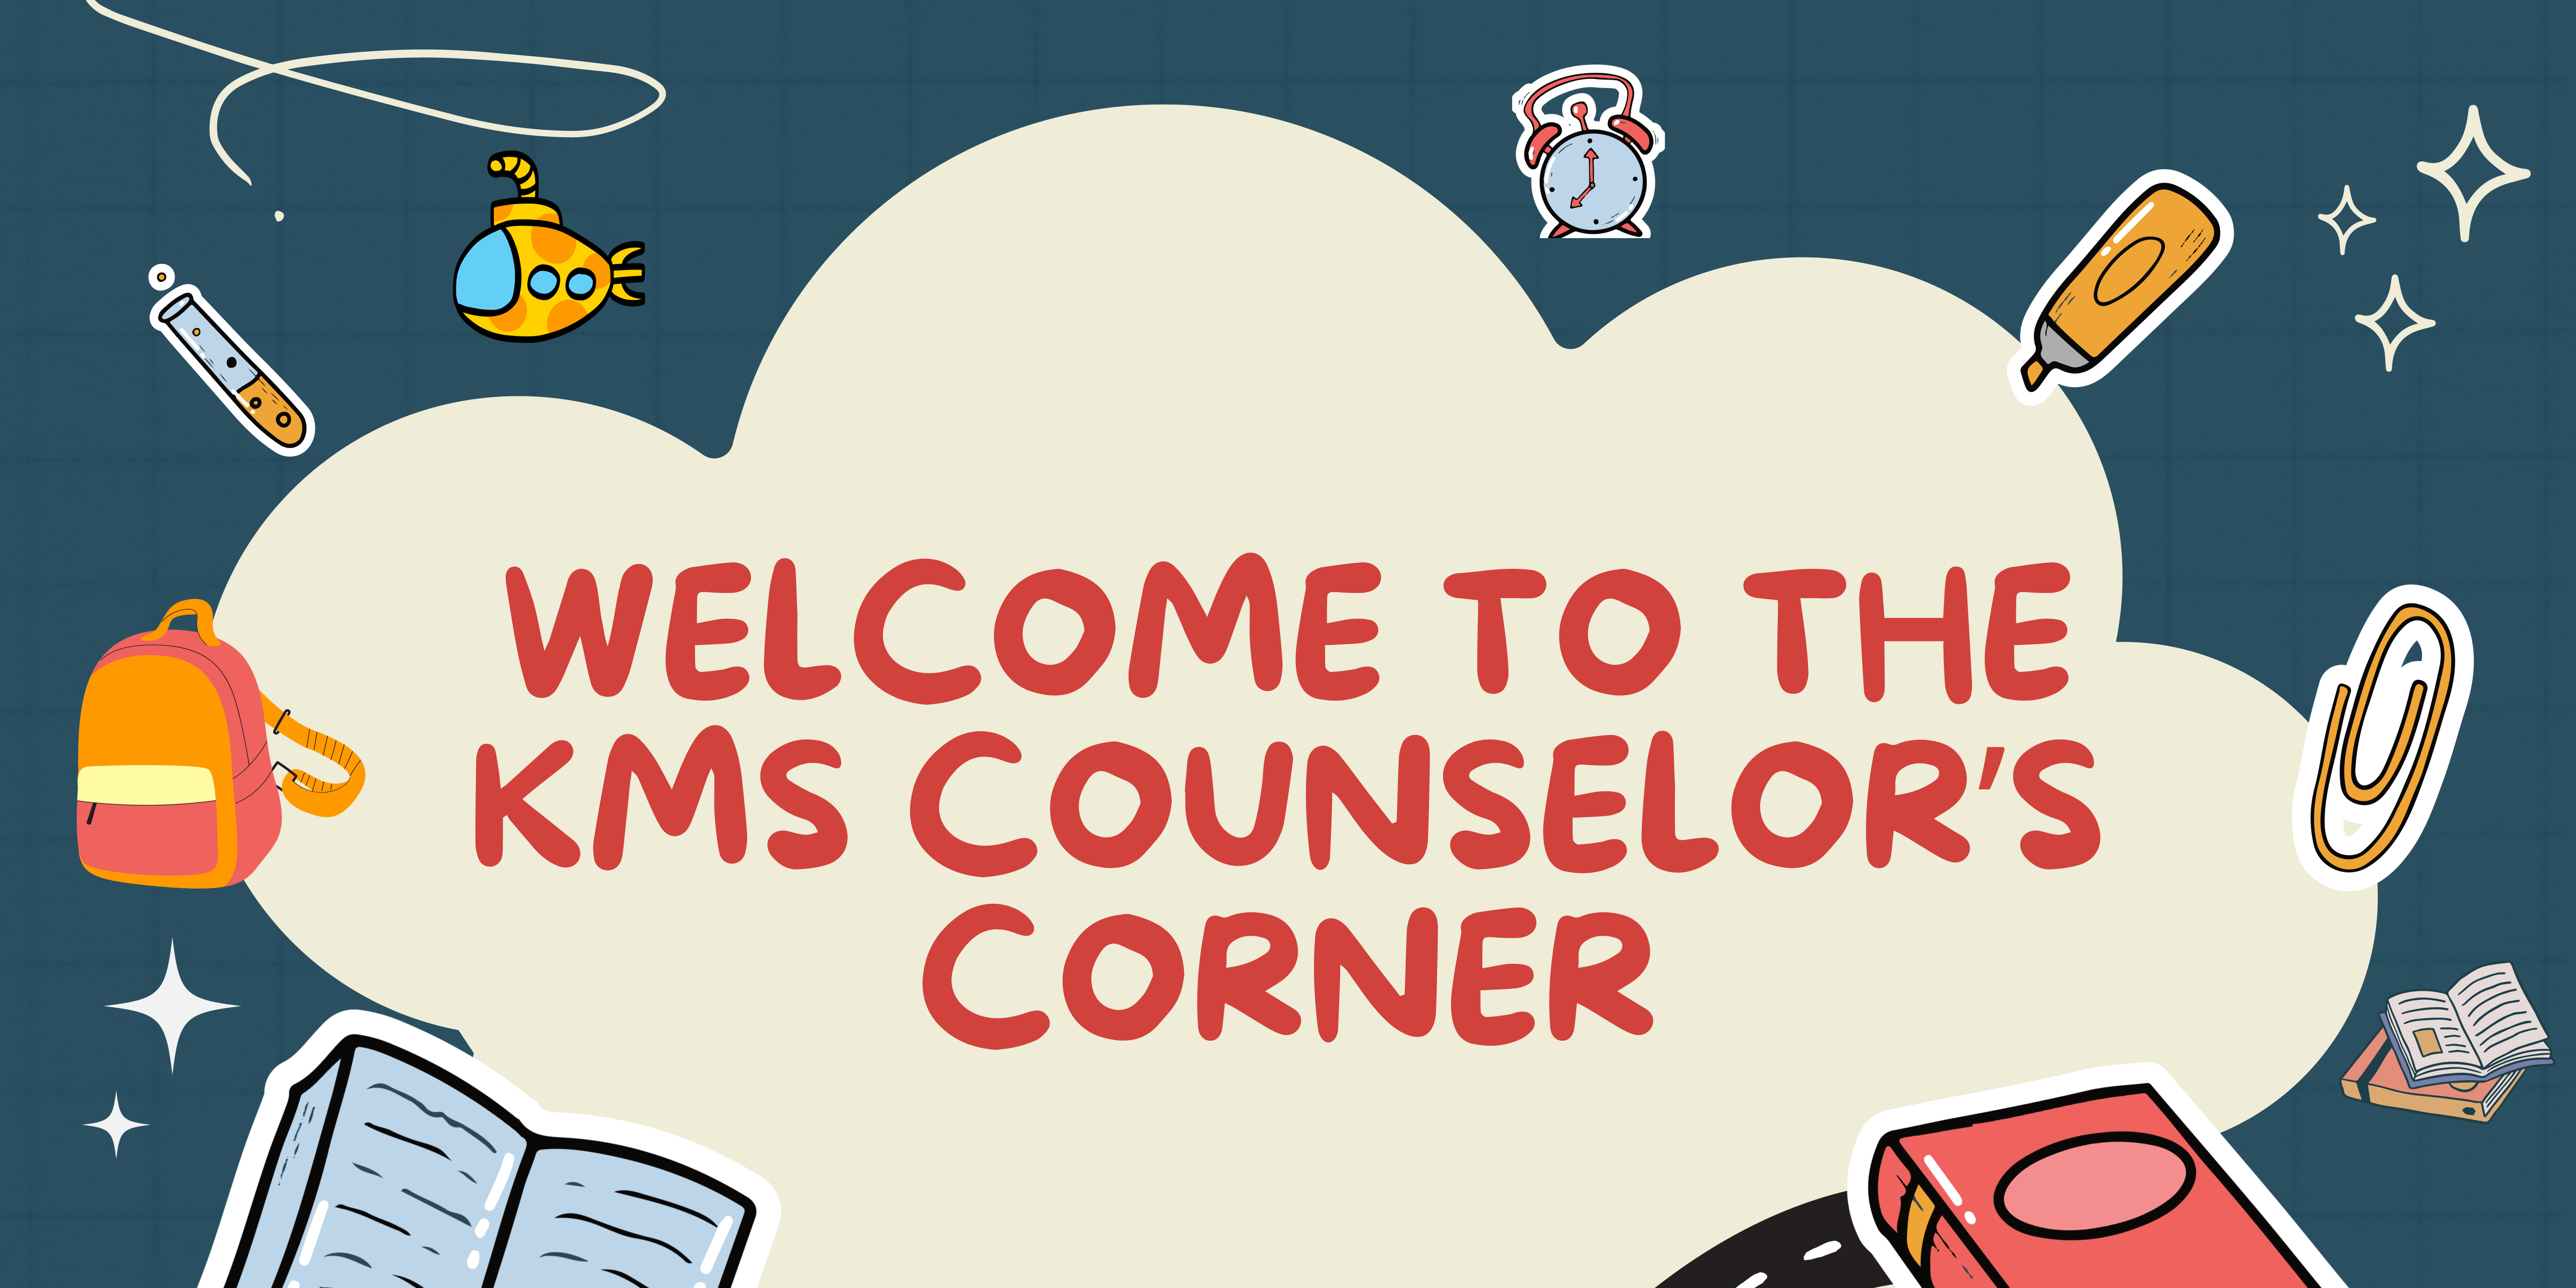 KMS Counselor's Corner We have some great things planned for you